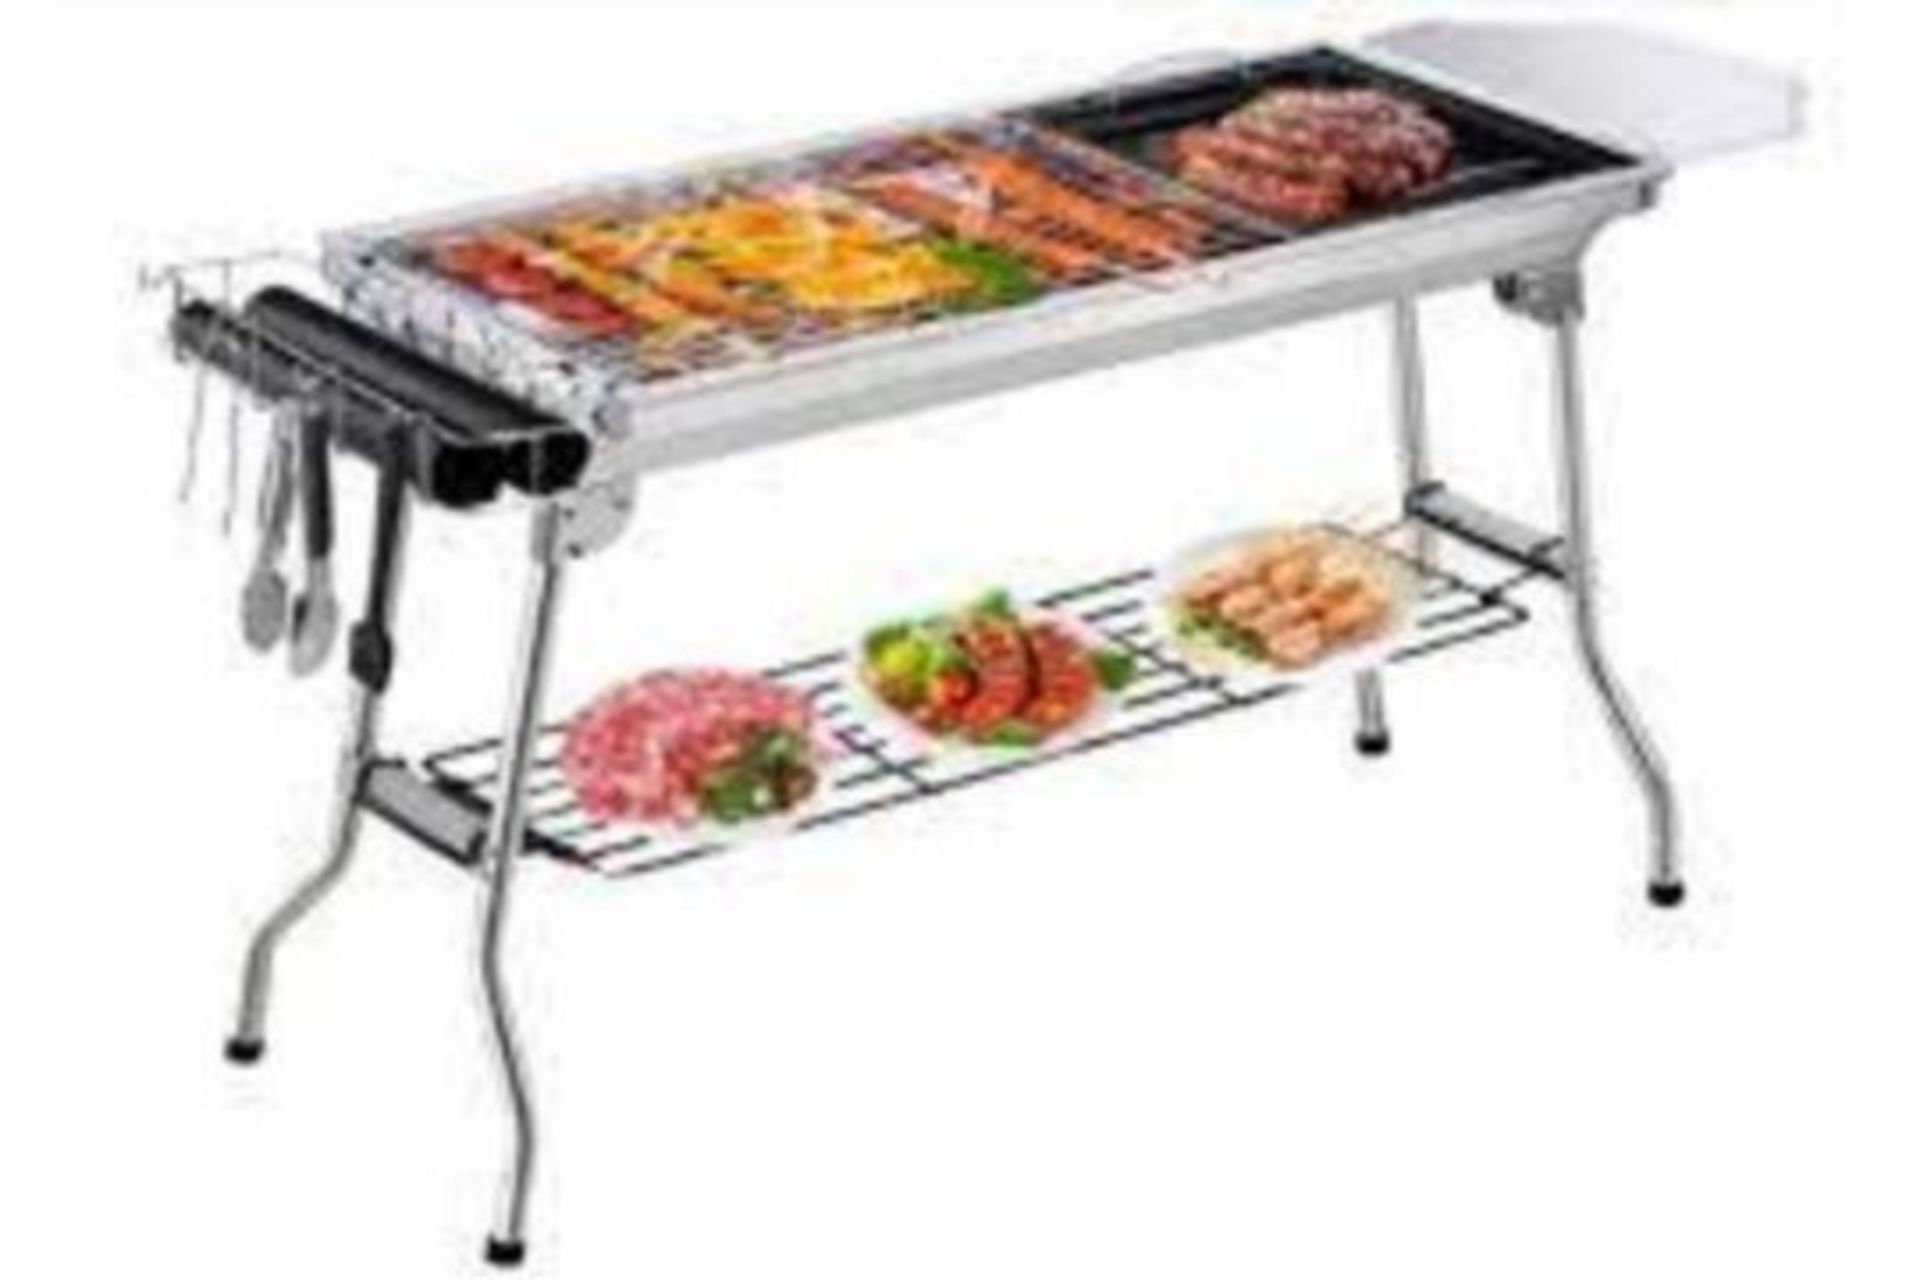 TRADE LOT 8 X BRAND NEW LARGE BBQ GRILL WITH UNDER STORAGE SHELF RRP £220